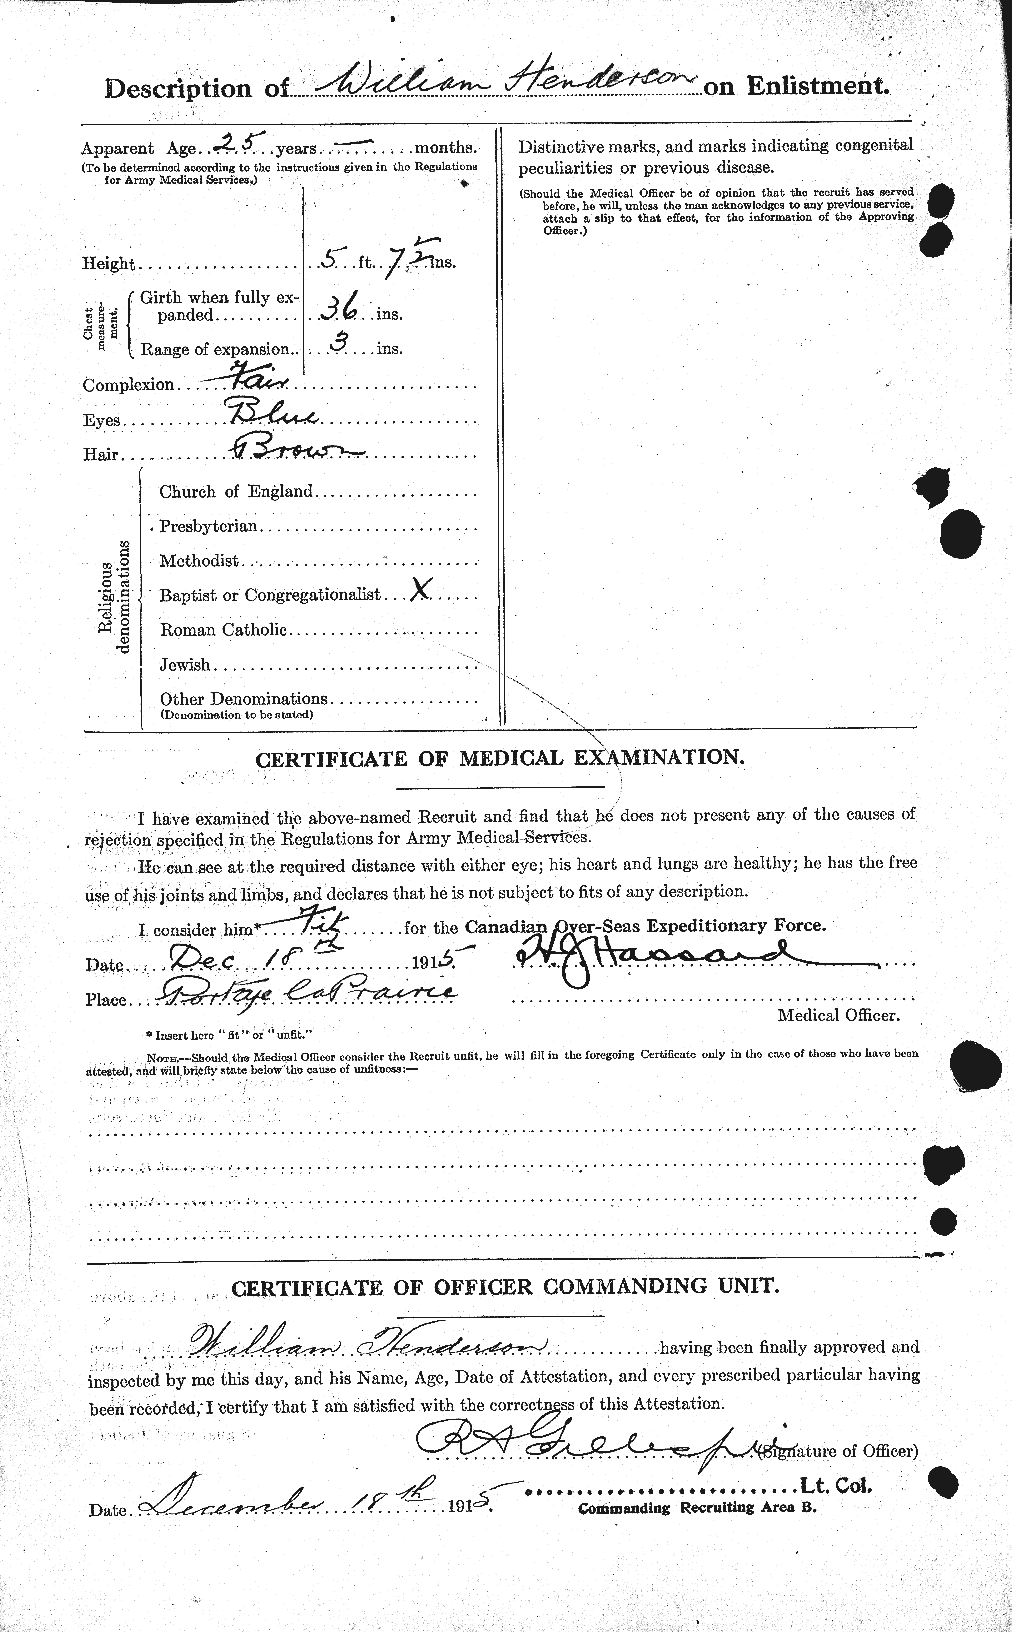 Personnel Records of the First World War - CEF 388991b